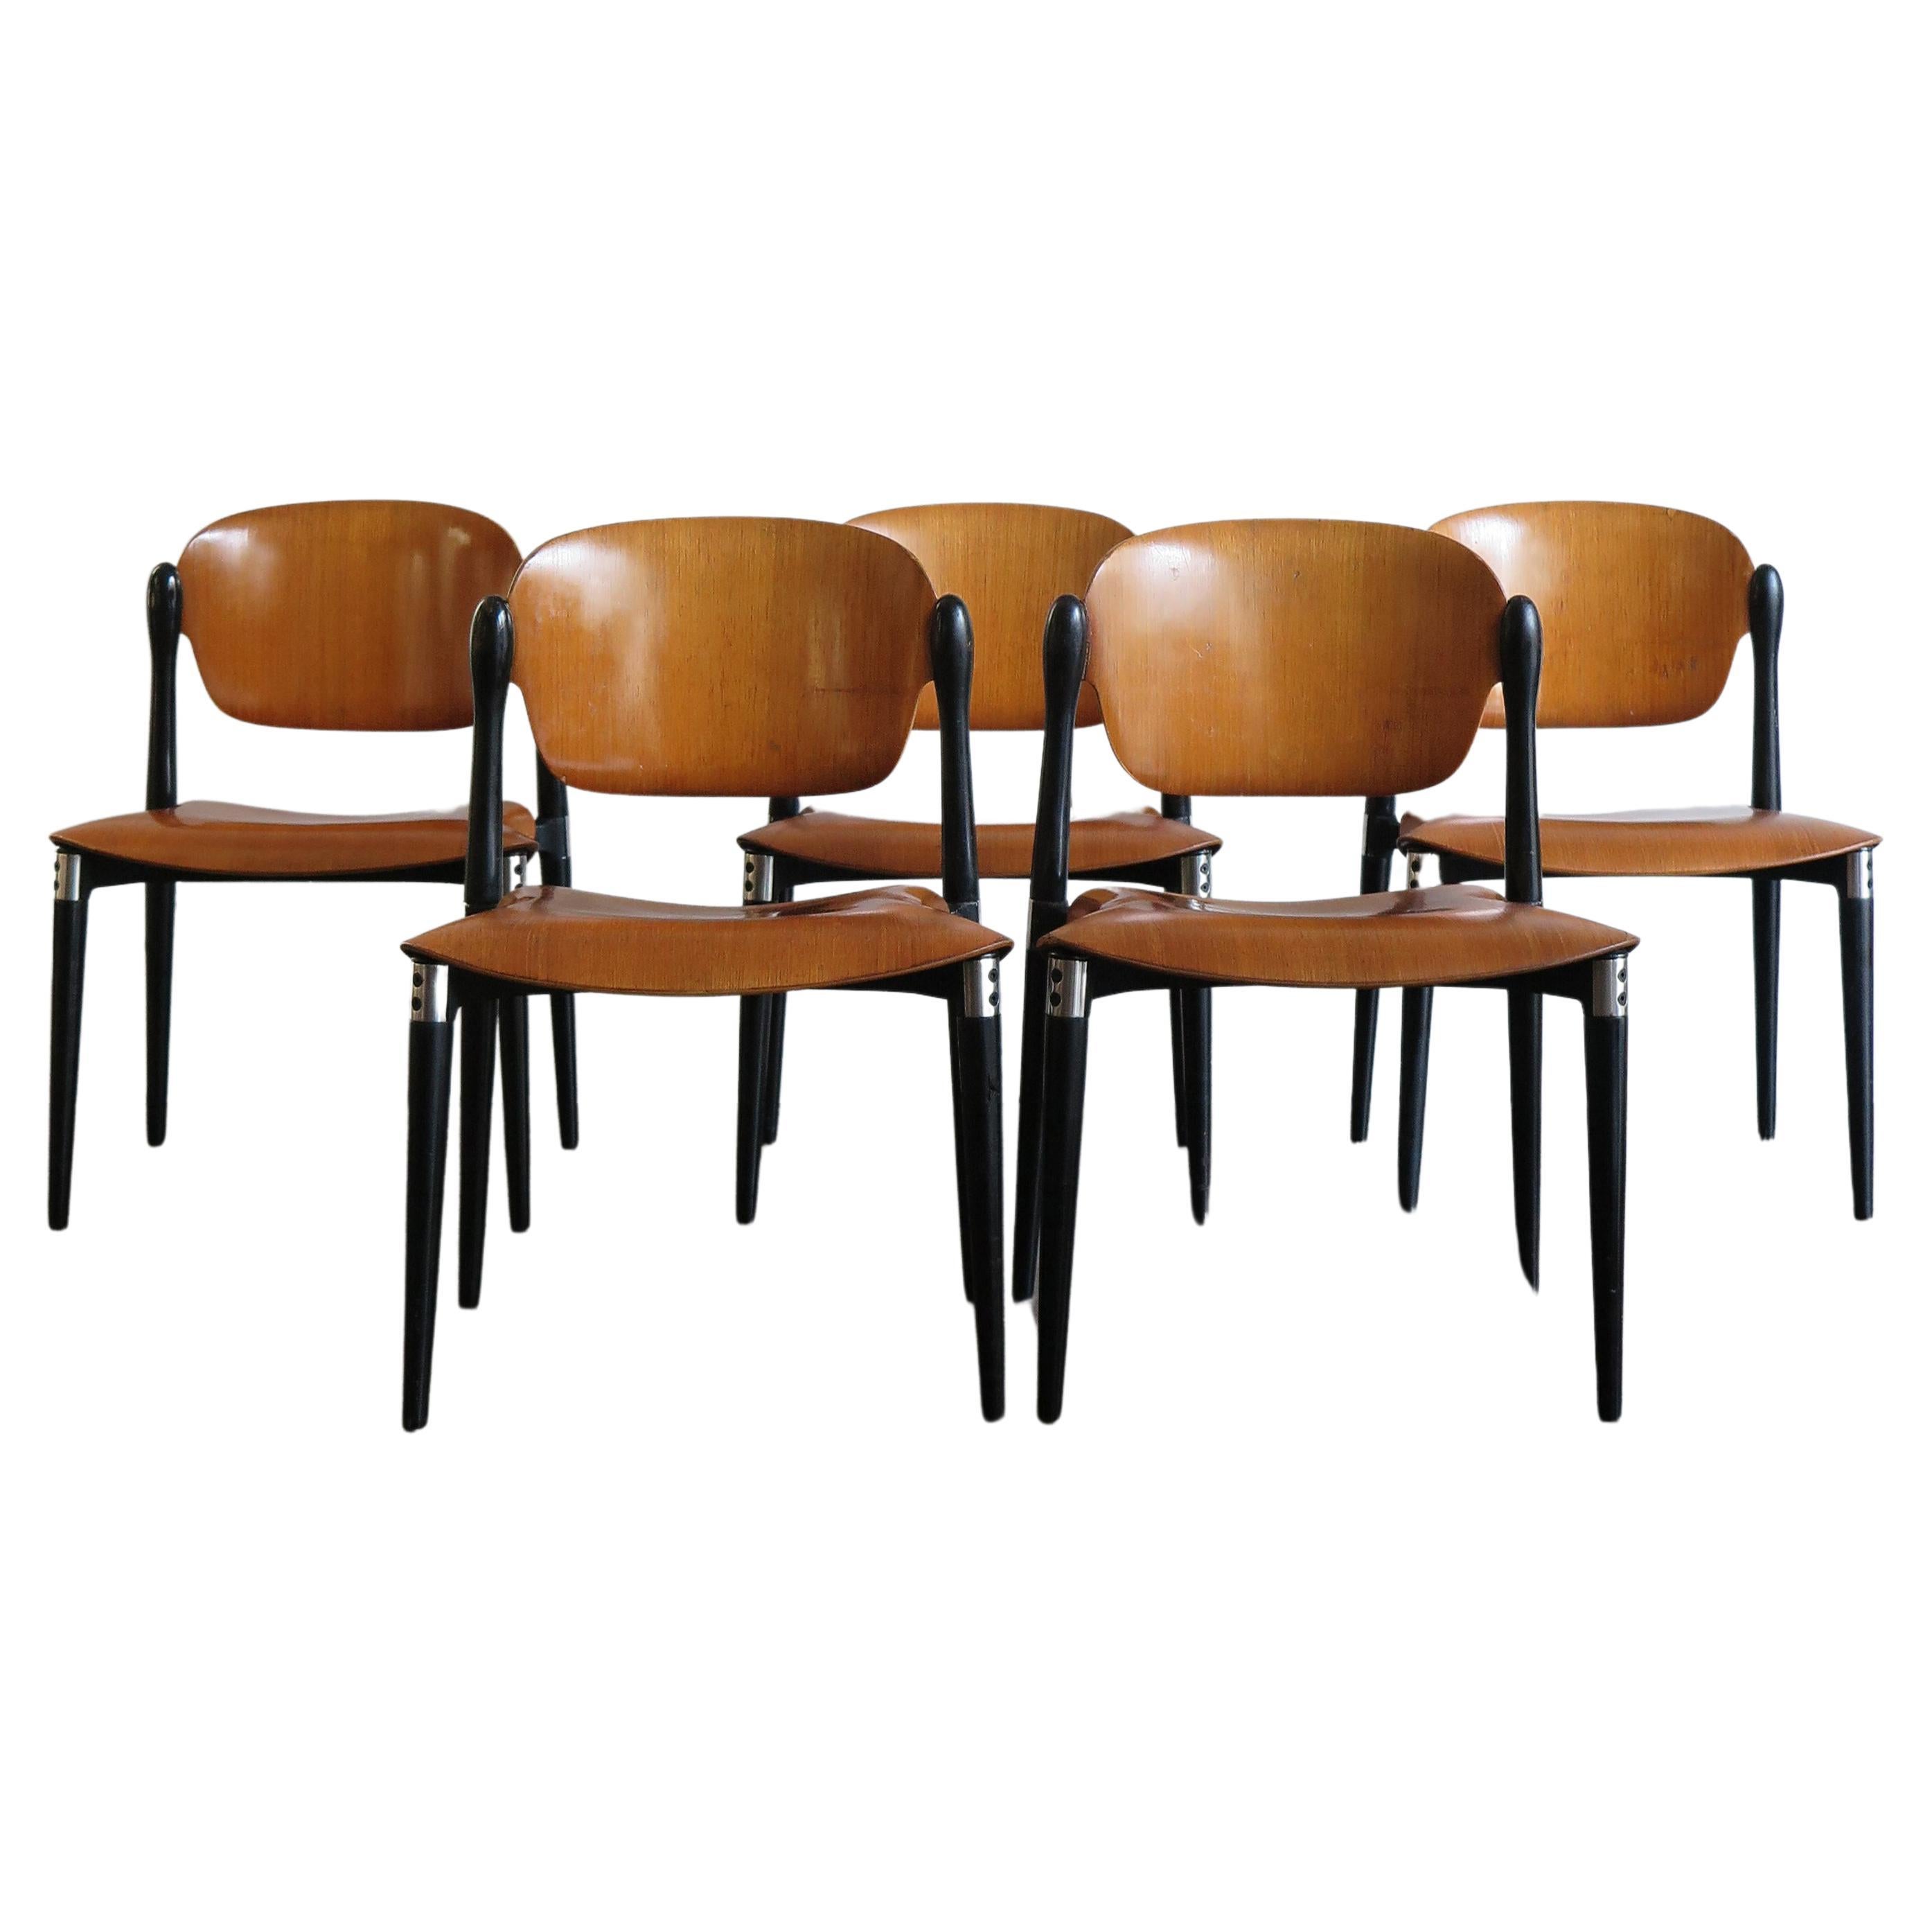 Eugenio Gerli for Tecno Midcentury Italian Wood Dining Chairs, 1962 For Sale